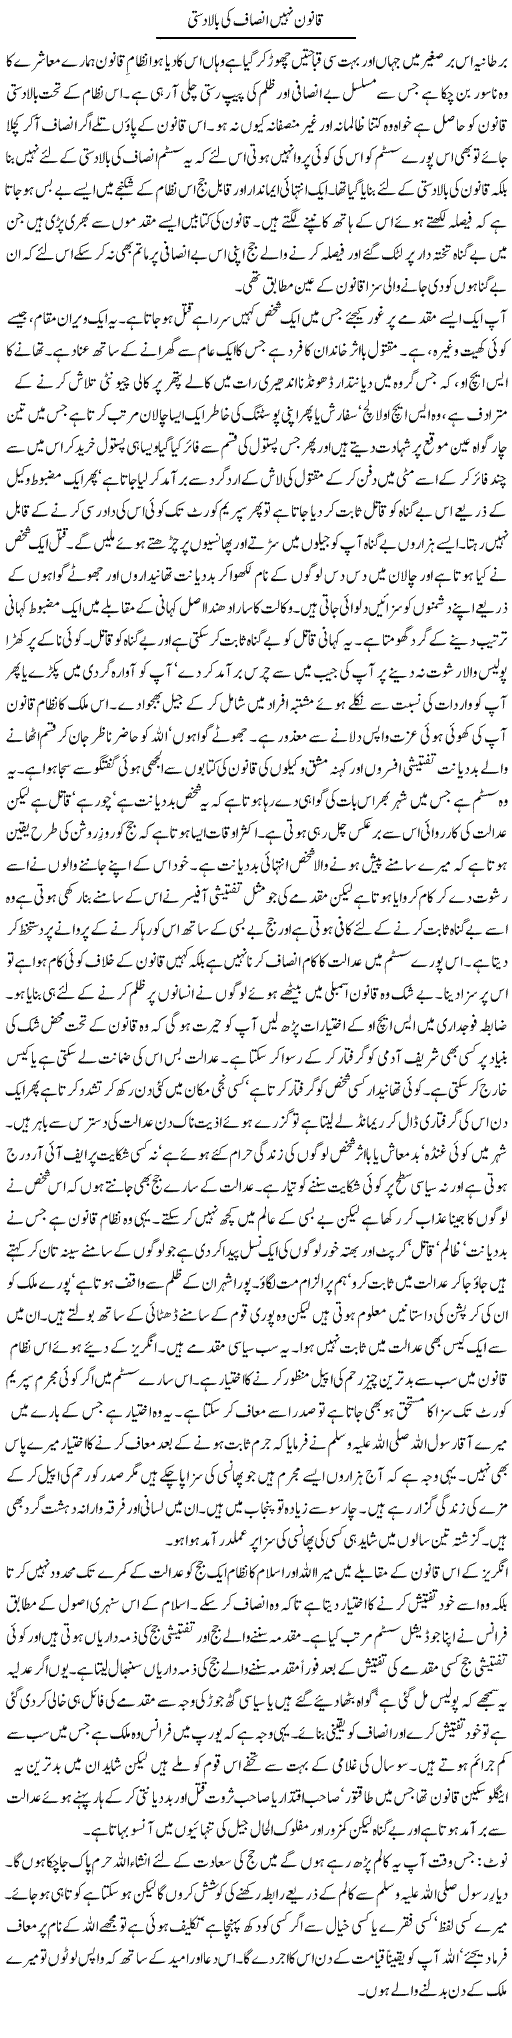 Justice and Law Express Column Orya Maqbool 26 October 2011